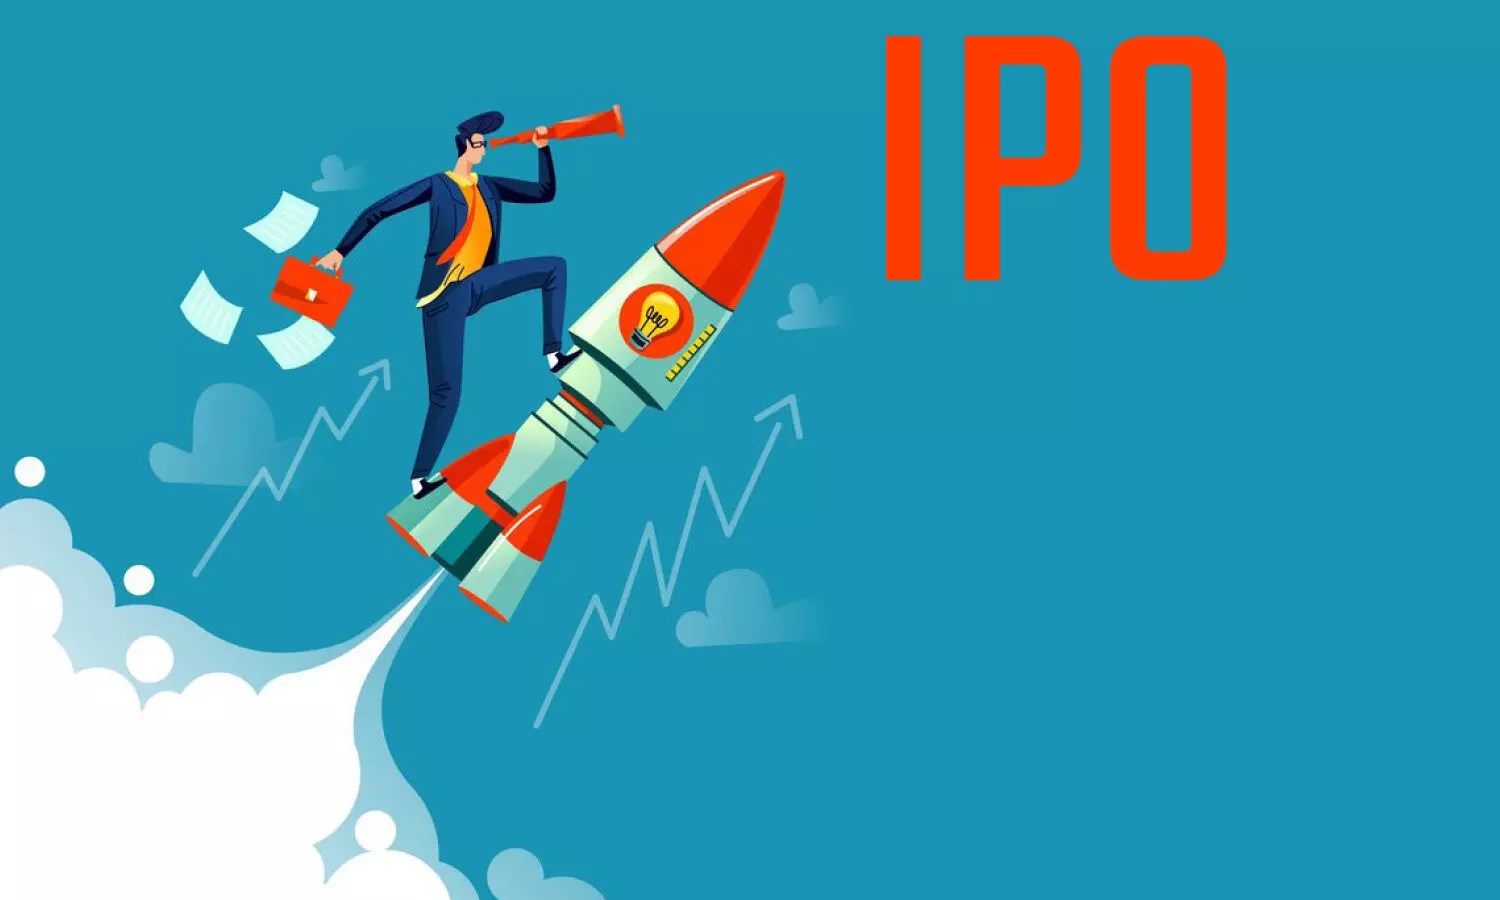 Unlocking Value Of Unlisted Players Via IPOs Enroute India’s Booming Long Term Economy